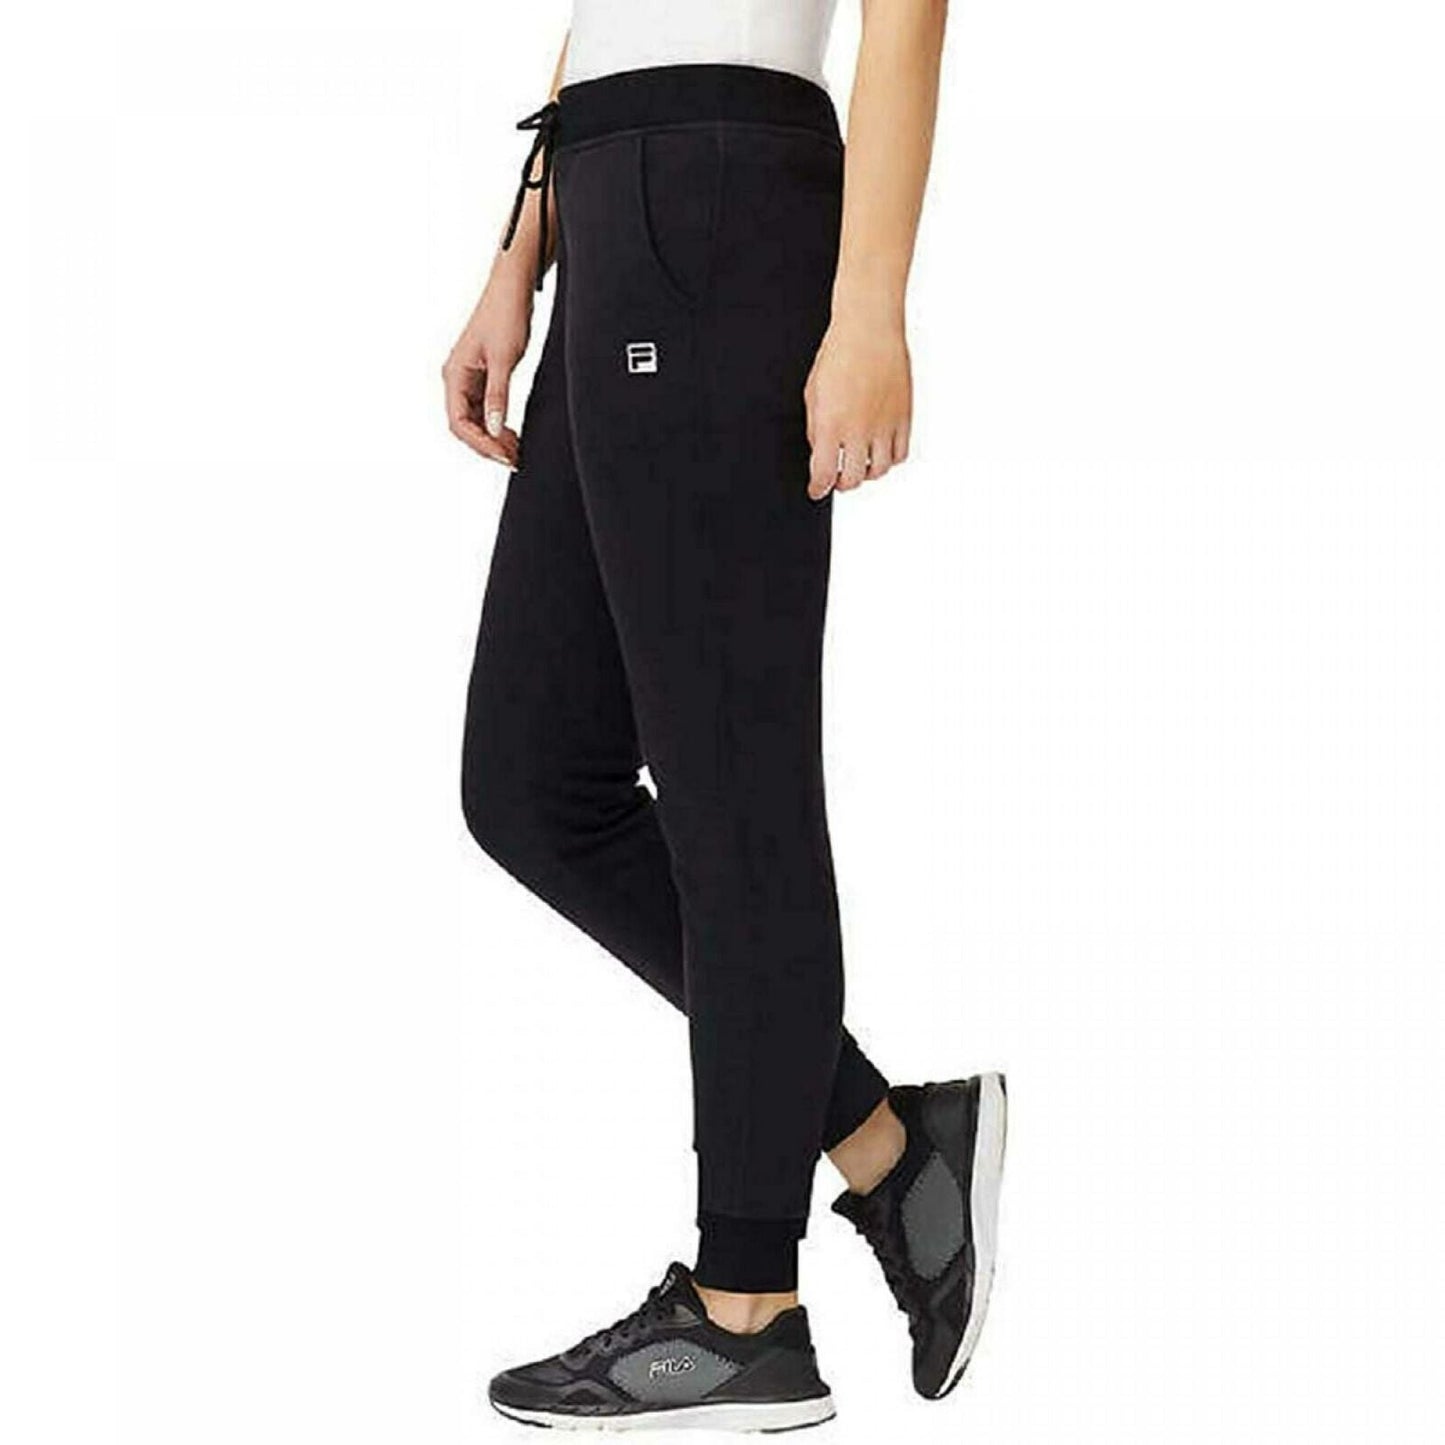 Comfortable and warm sports pants from Fila